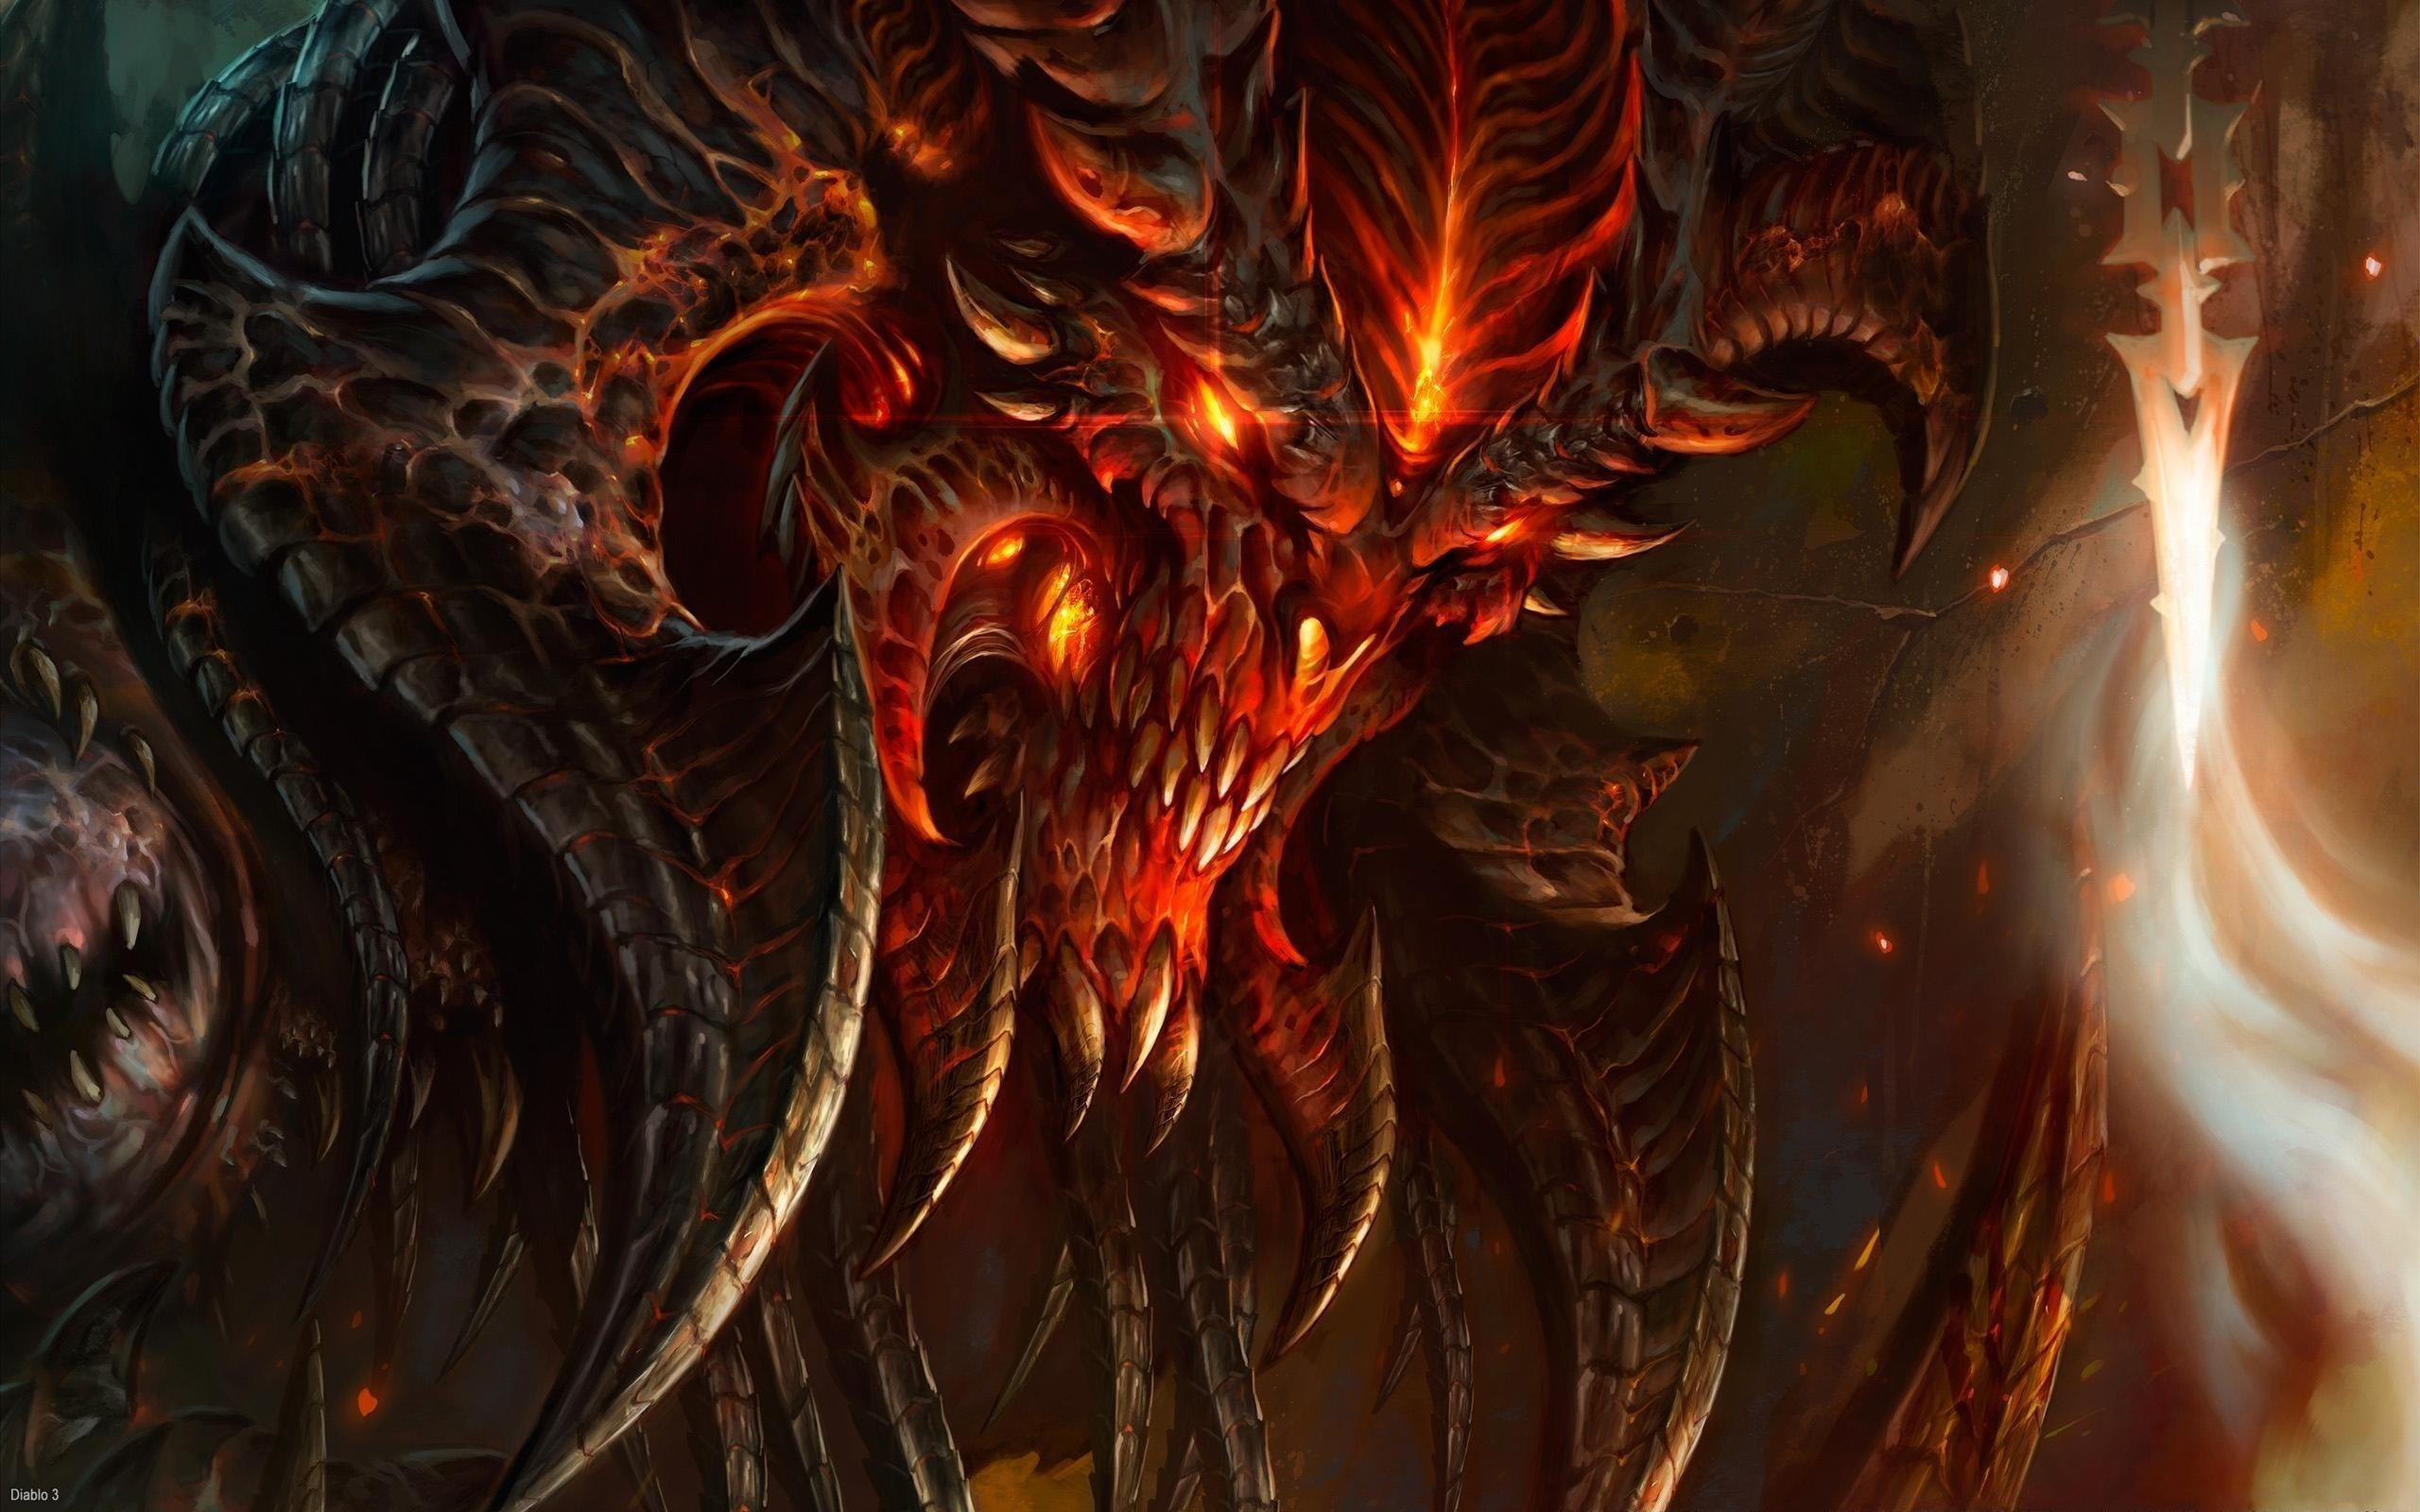 Diablo III desktop wallpaper featuring the iconic character from the video game